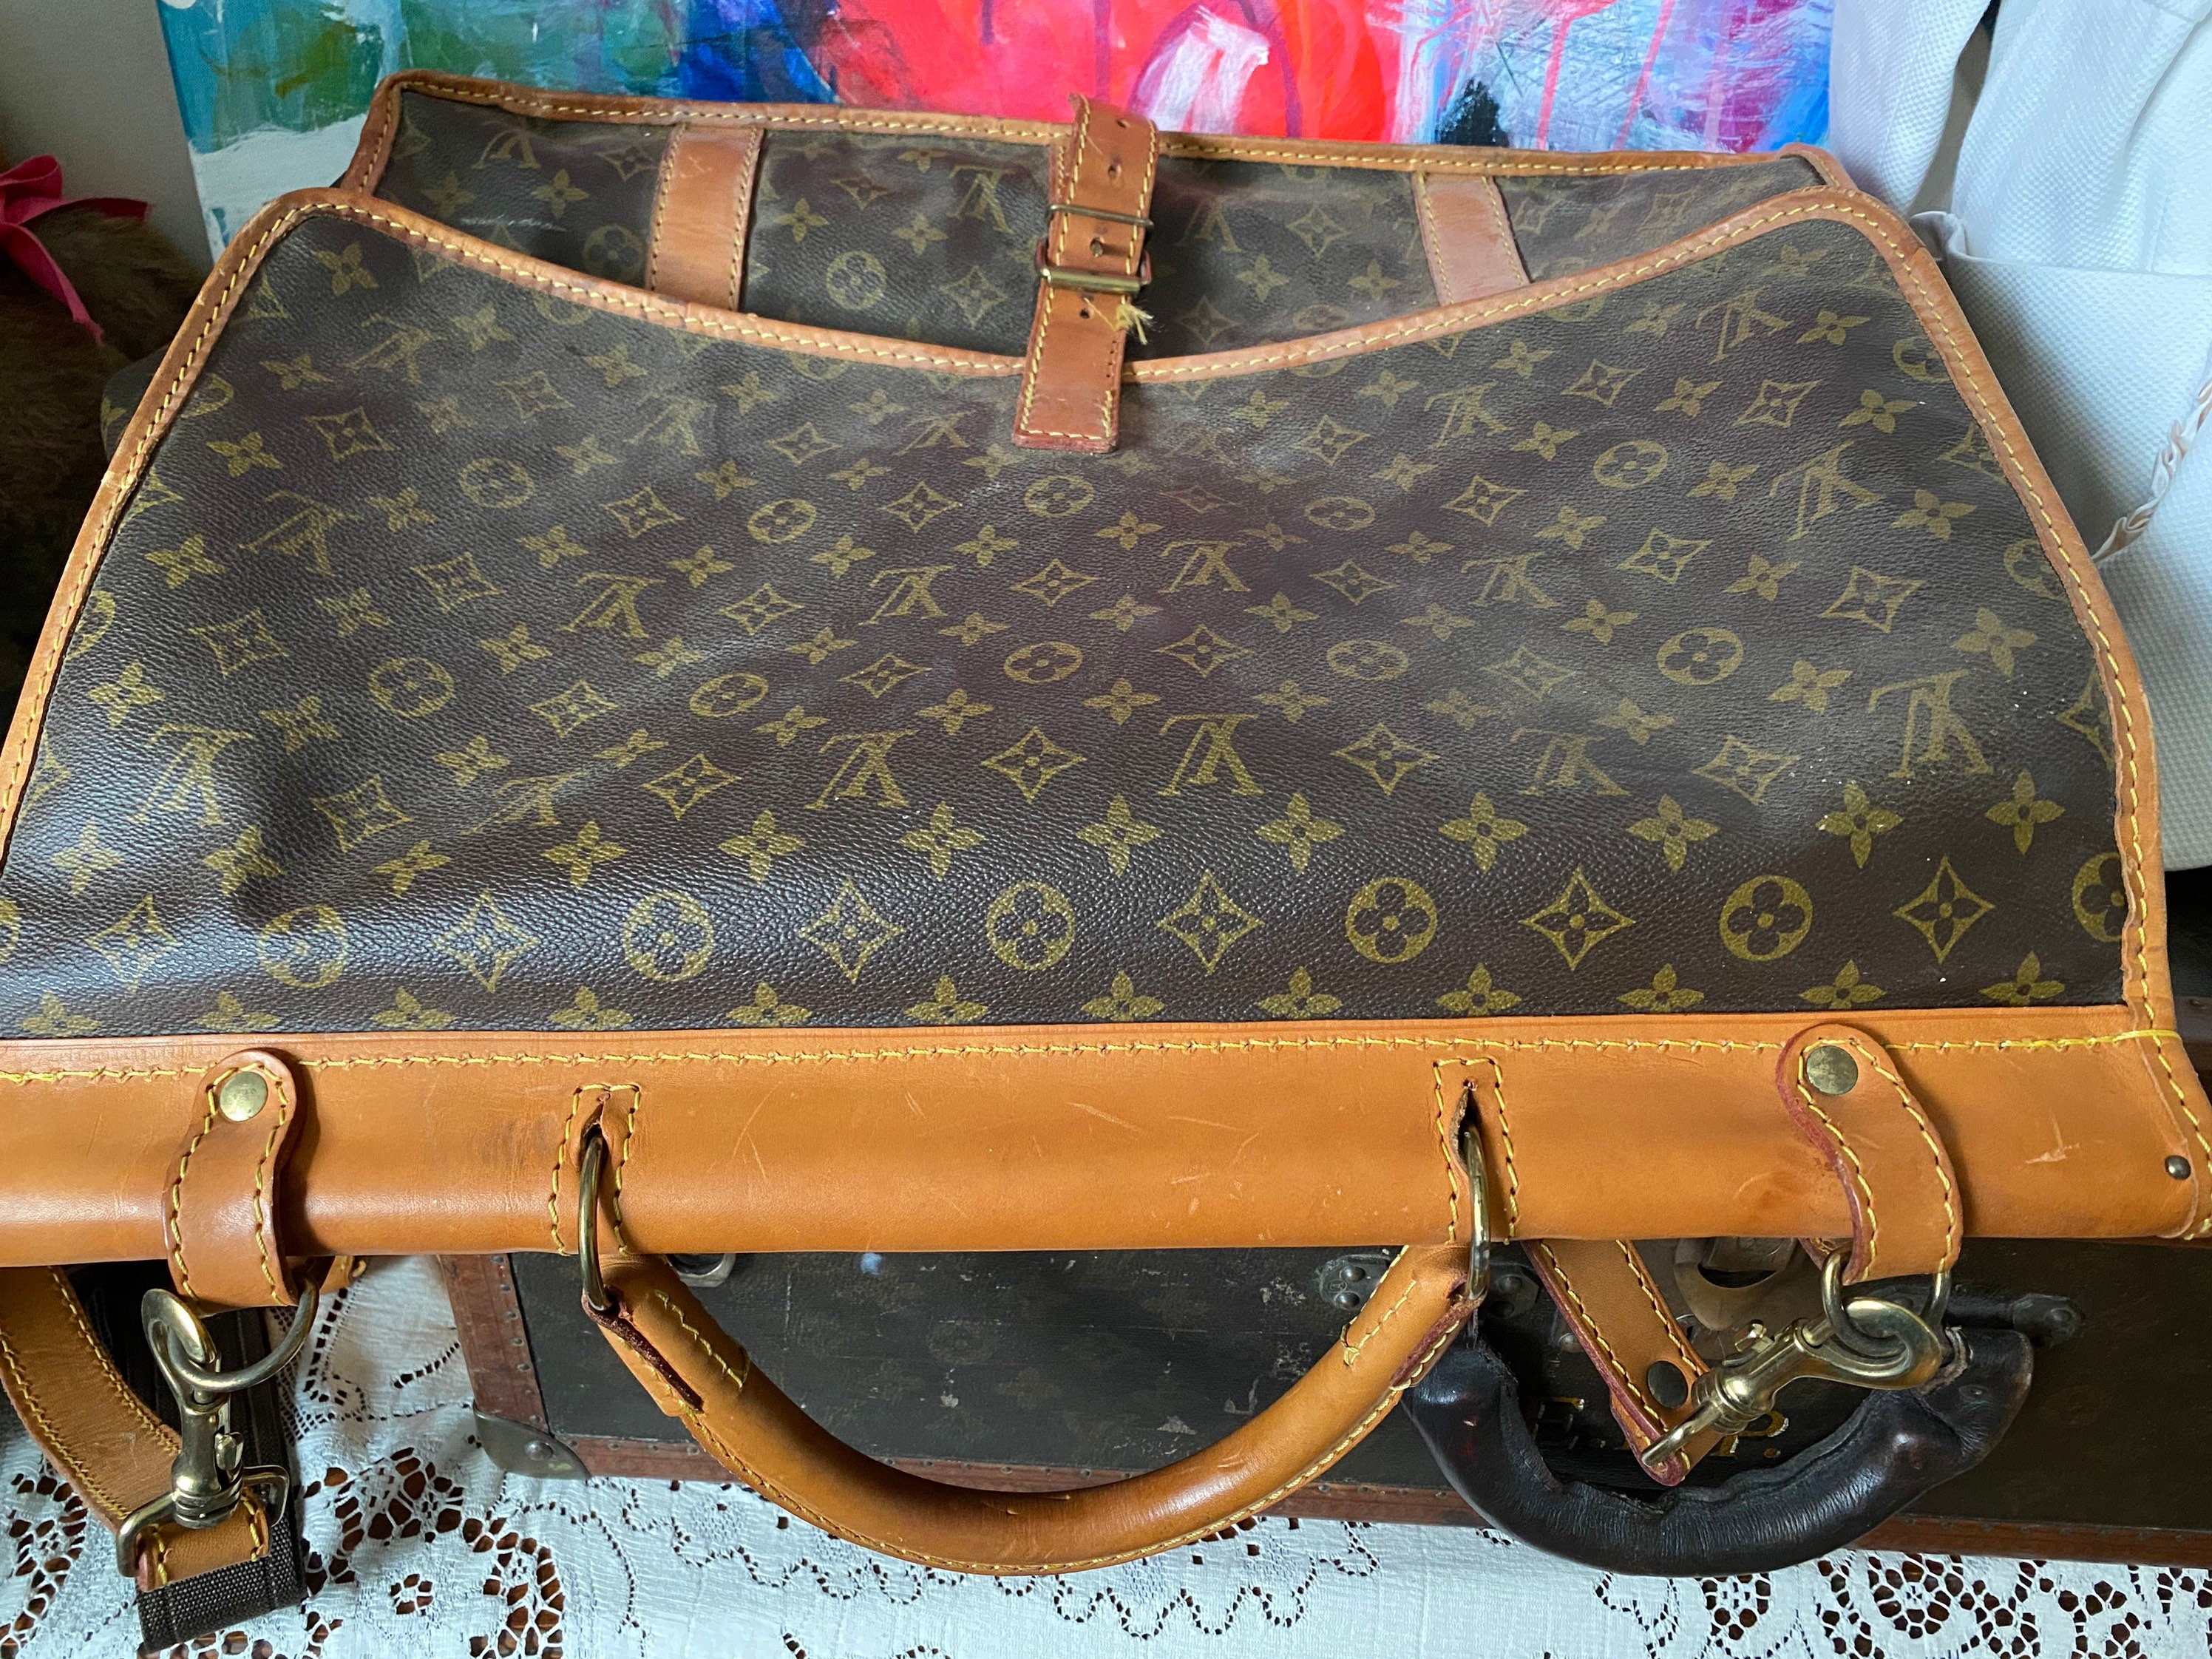 SALE Rare Vintage Auth LOUIS VUITTON Sac Chasse Tote Luggage -  Denmark